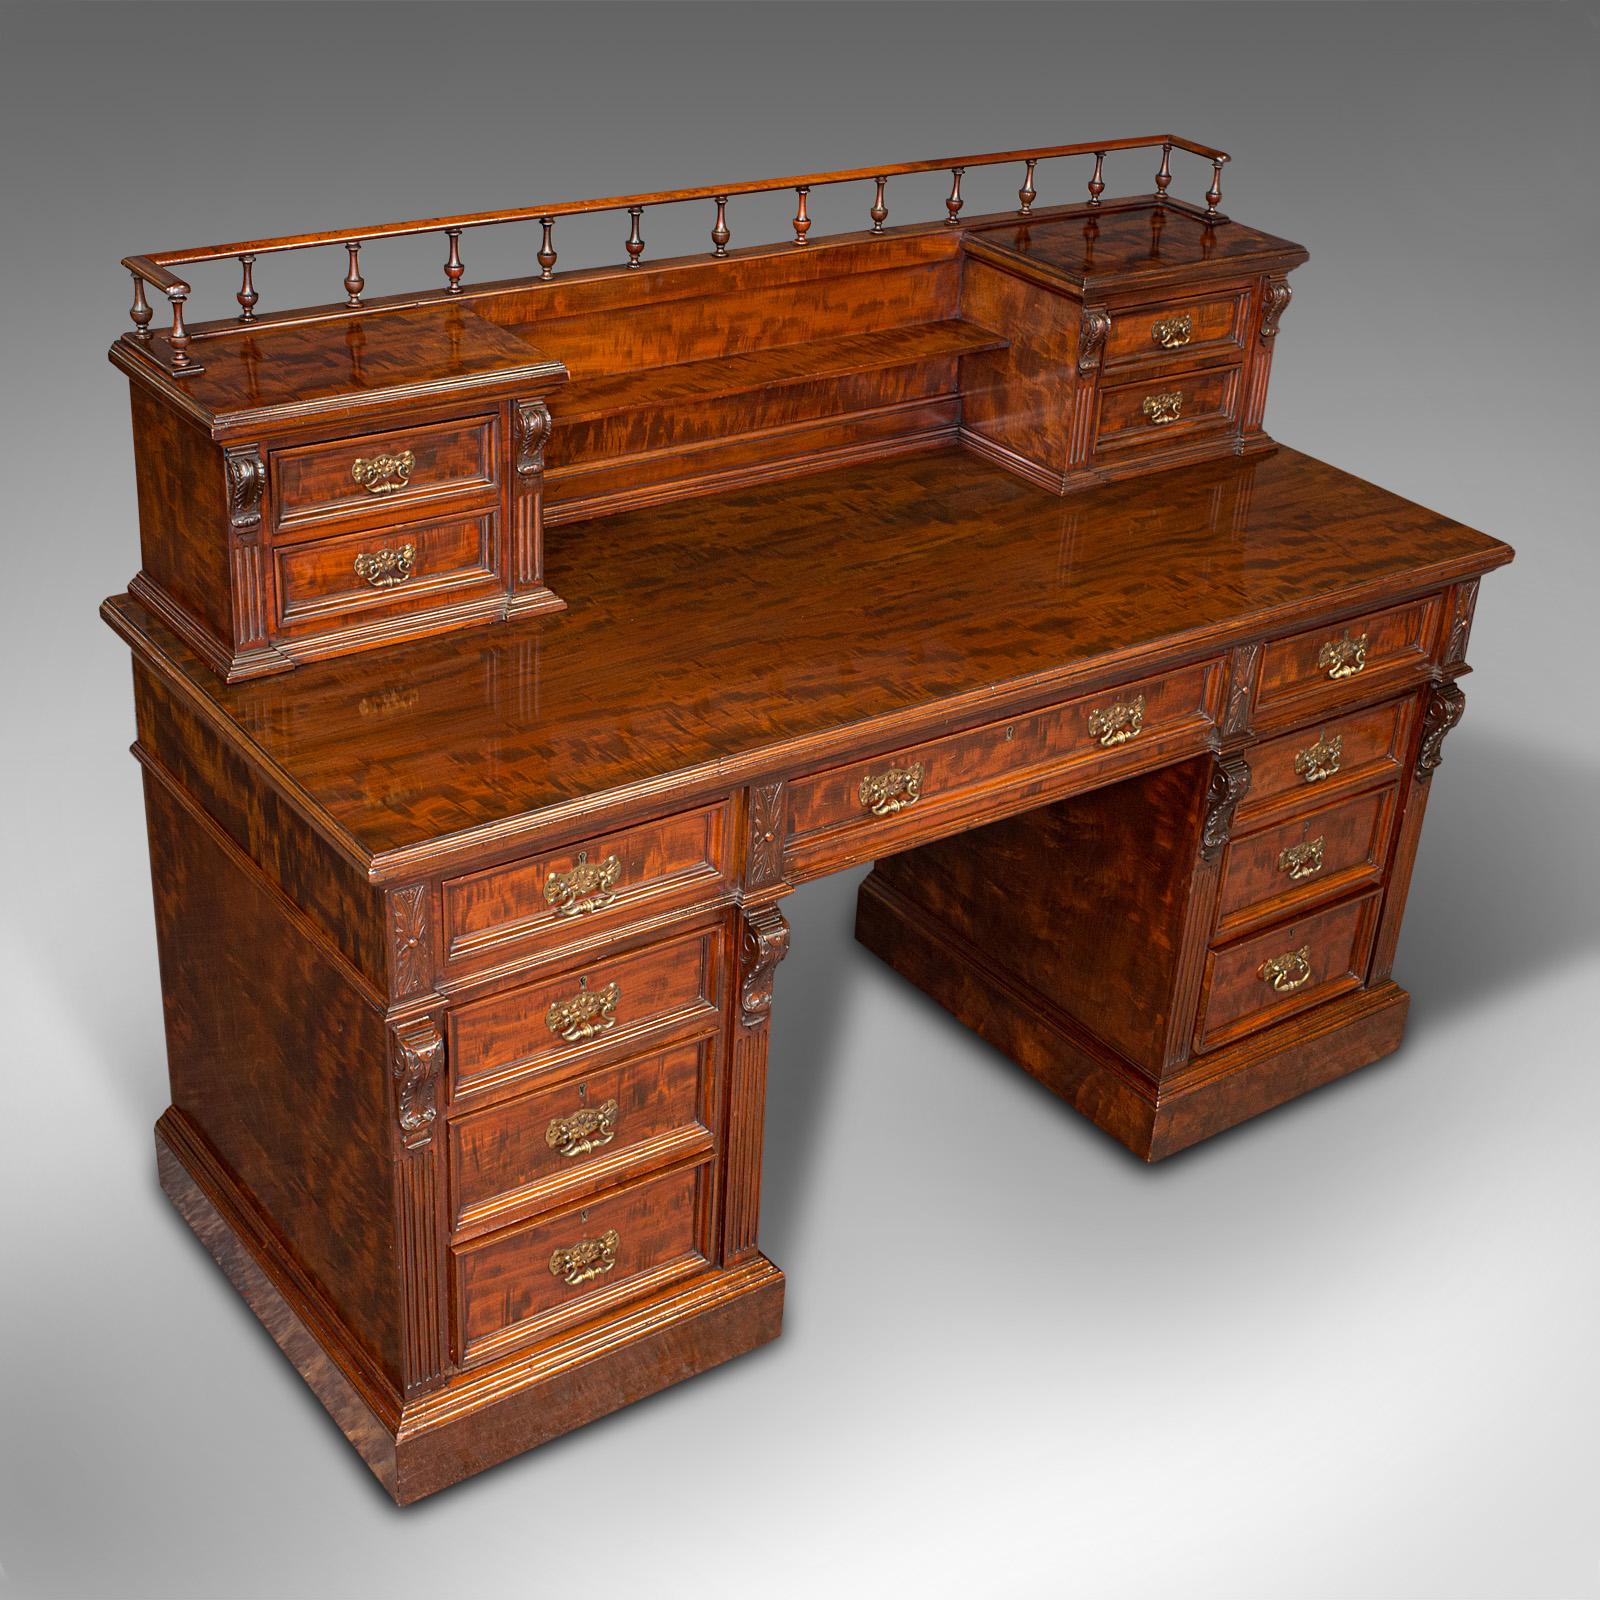 British Grand Antique Executive Desk, English, Satinwood, 13 Drawer, Office, Victorian For Sale